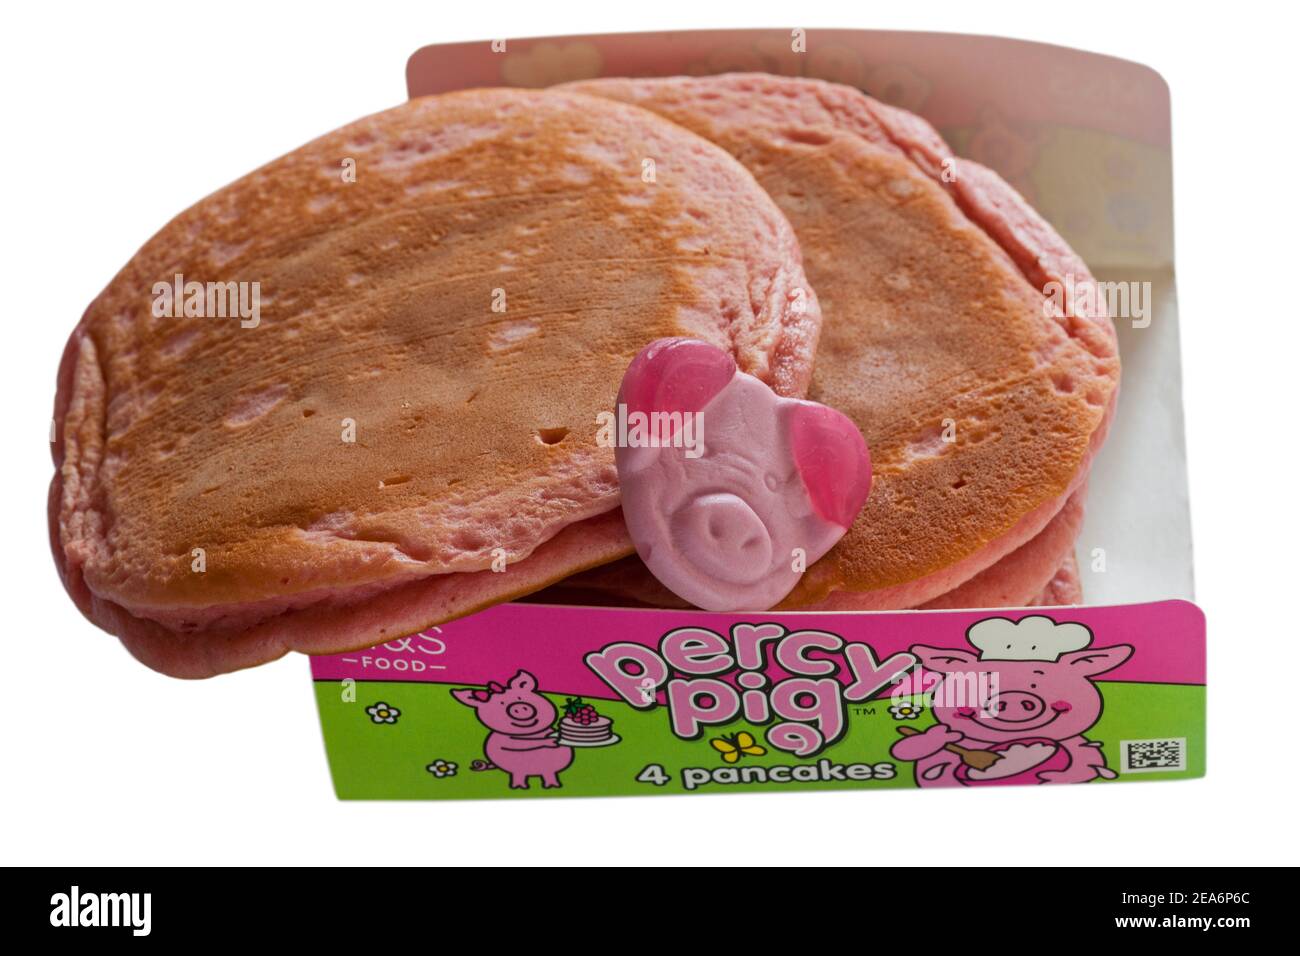 Percy Pig pancakes from M&S with Percy Pig sweet ready for St Valentines day isolated on white background Stock Photo